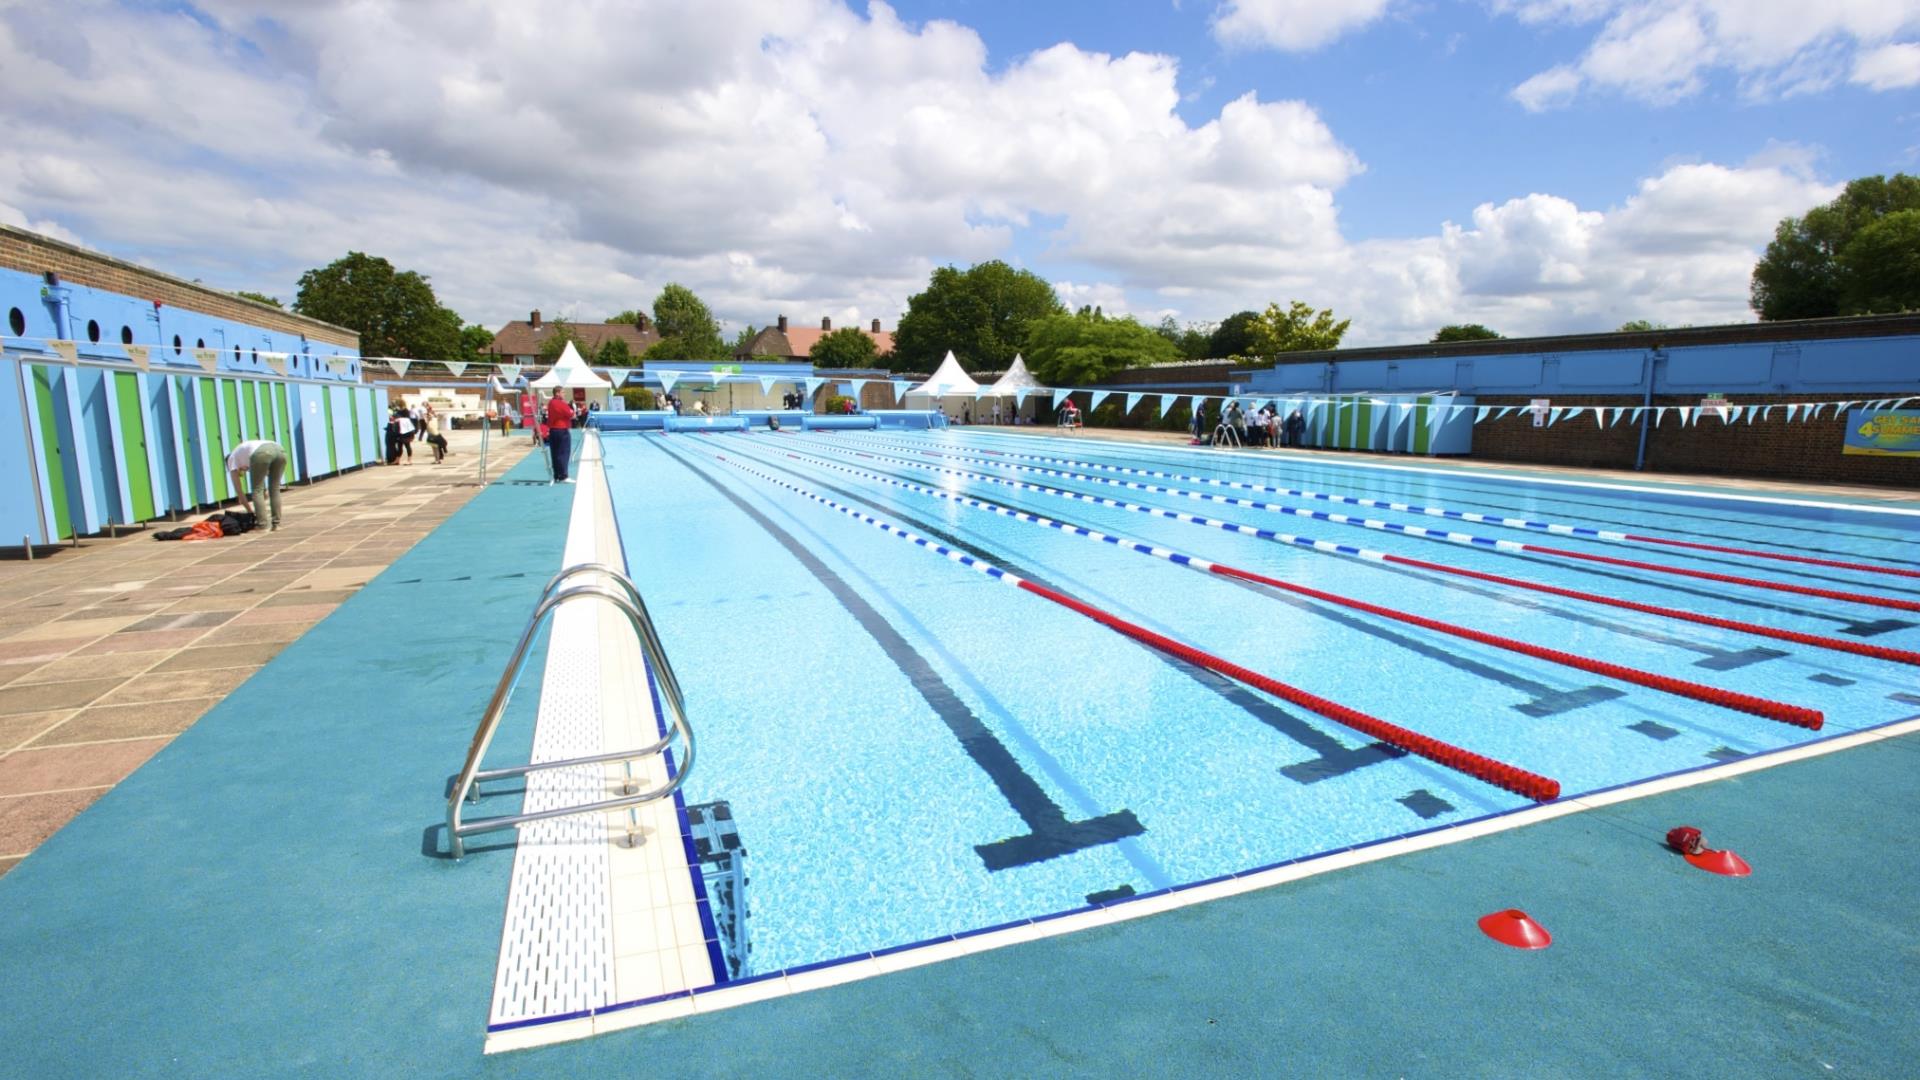 The beautiful blue of the pool at Charlton Lido.